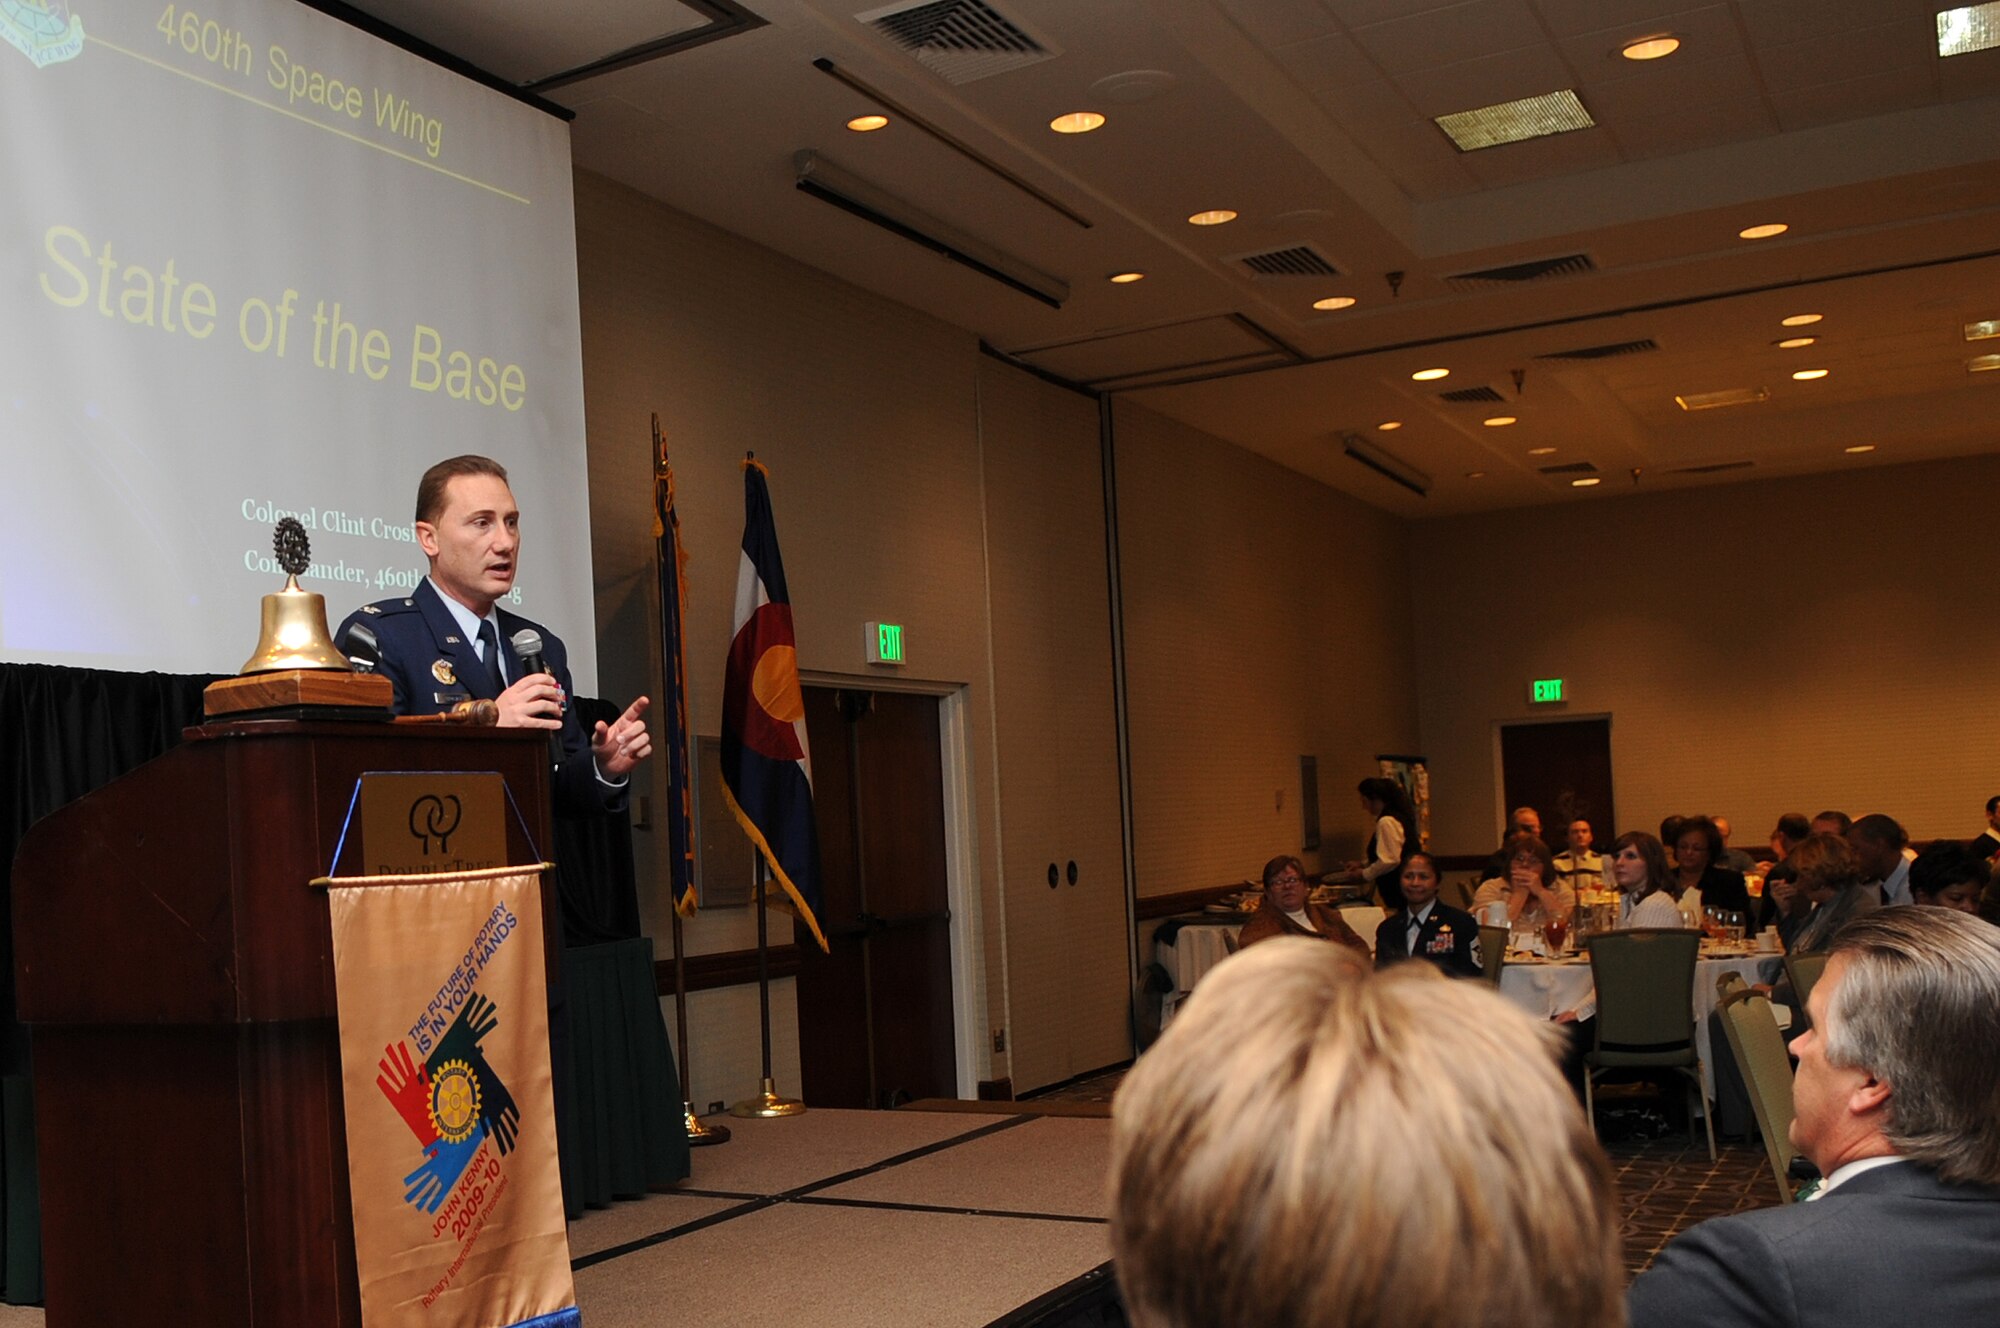 BUCKLEY AIR FORCE BASE, Colo. -- Col. Clint Crosier, 460th Space WIng commander, speaks to the local community during his State of the Base address Jan 13 in Aurora, Colo. (U.S. Air Force Photo by Airman First Class Marcy Glass)





